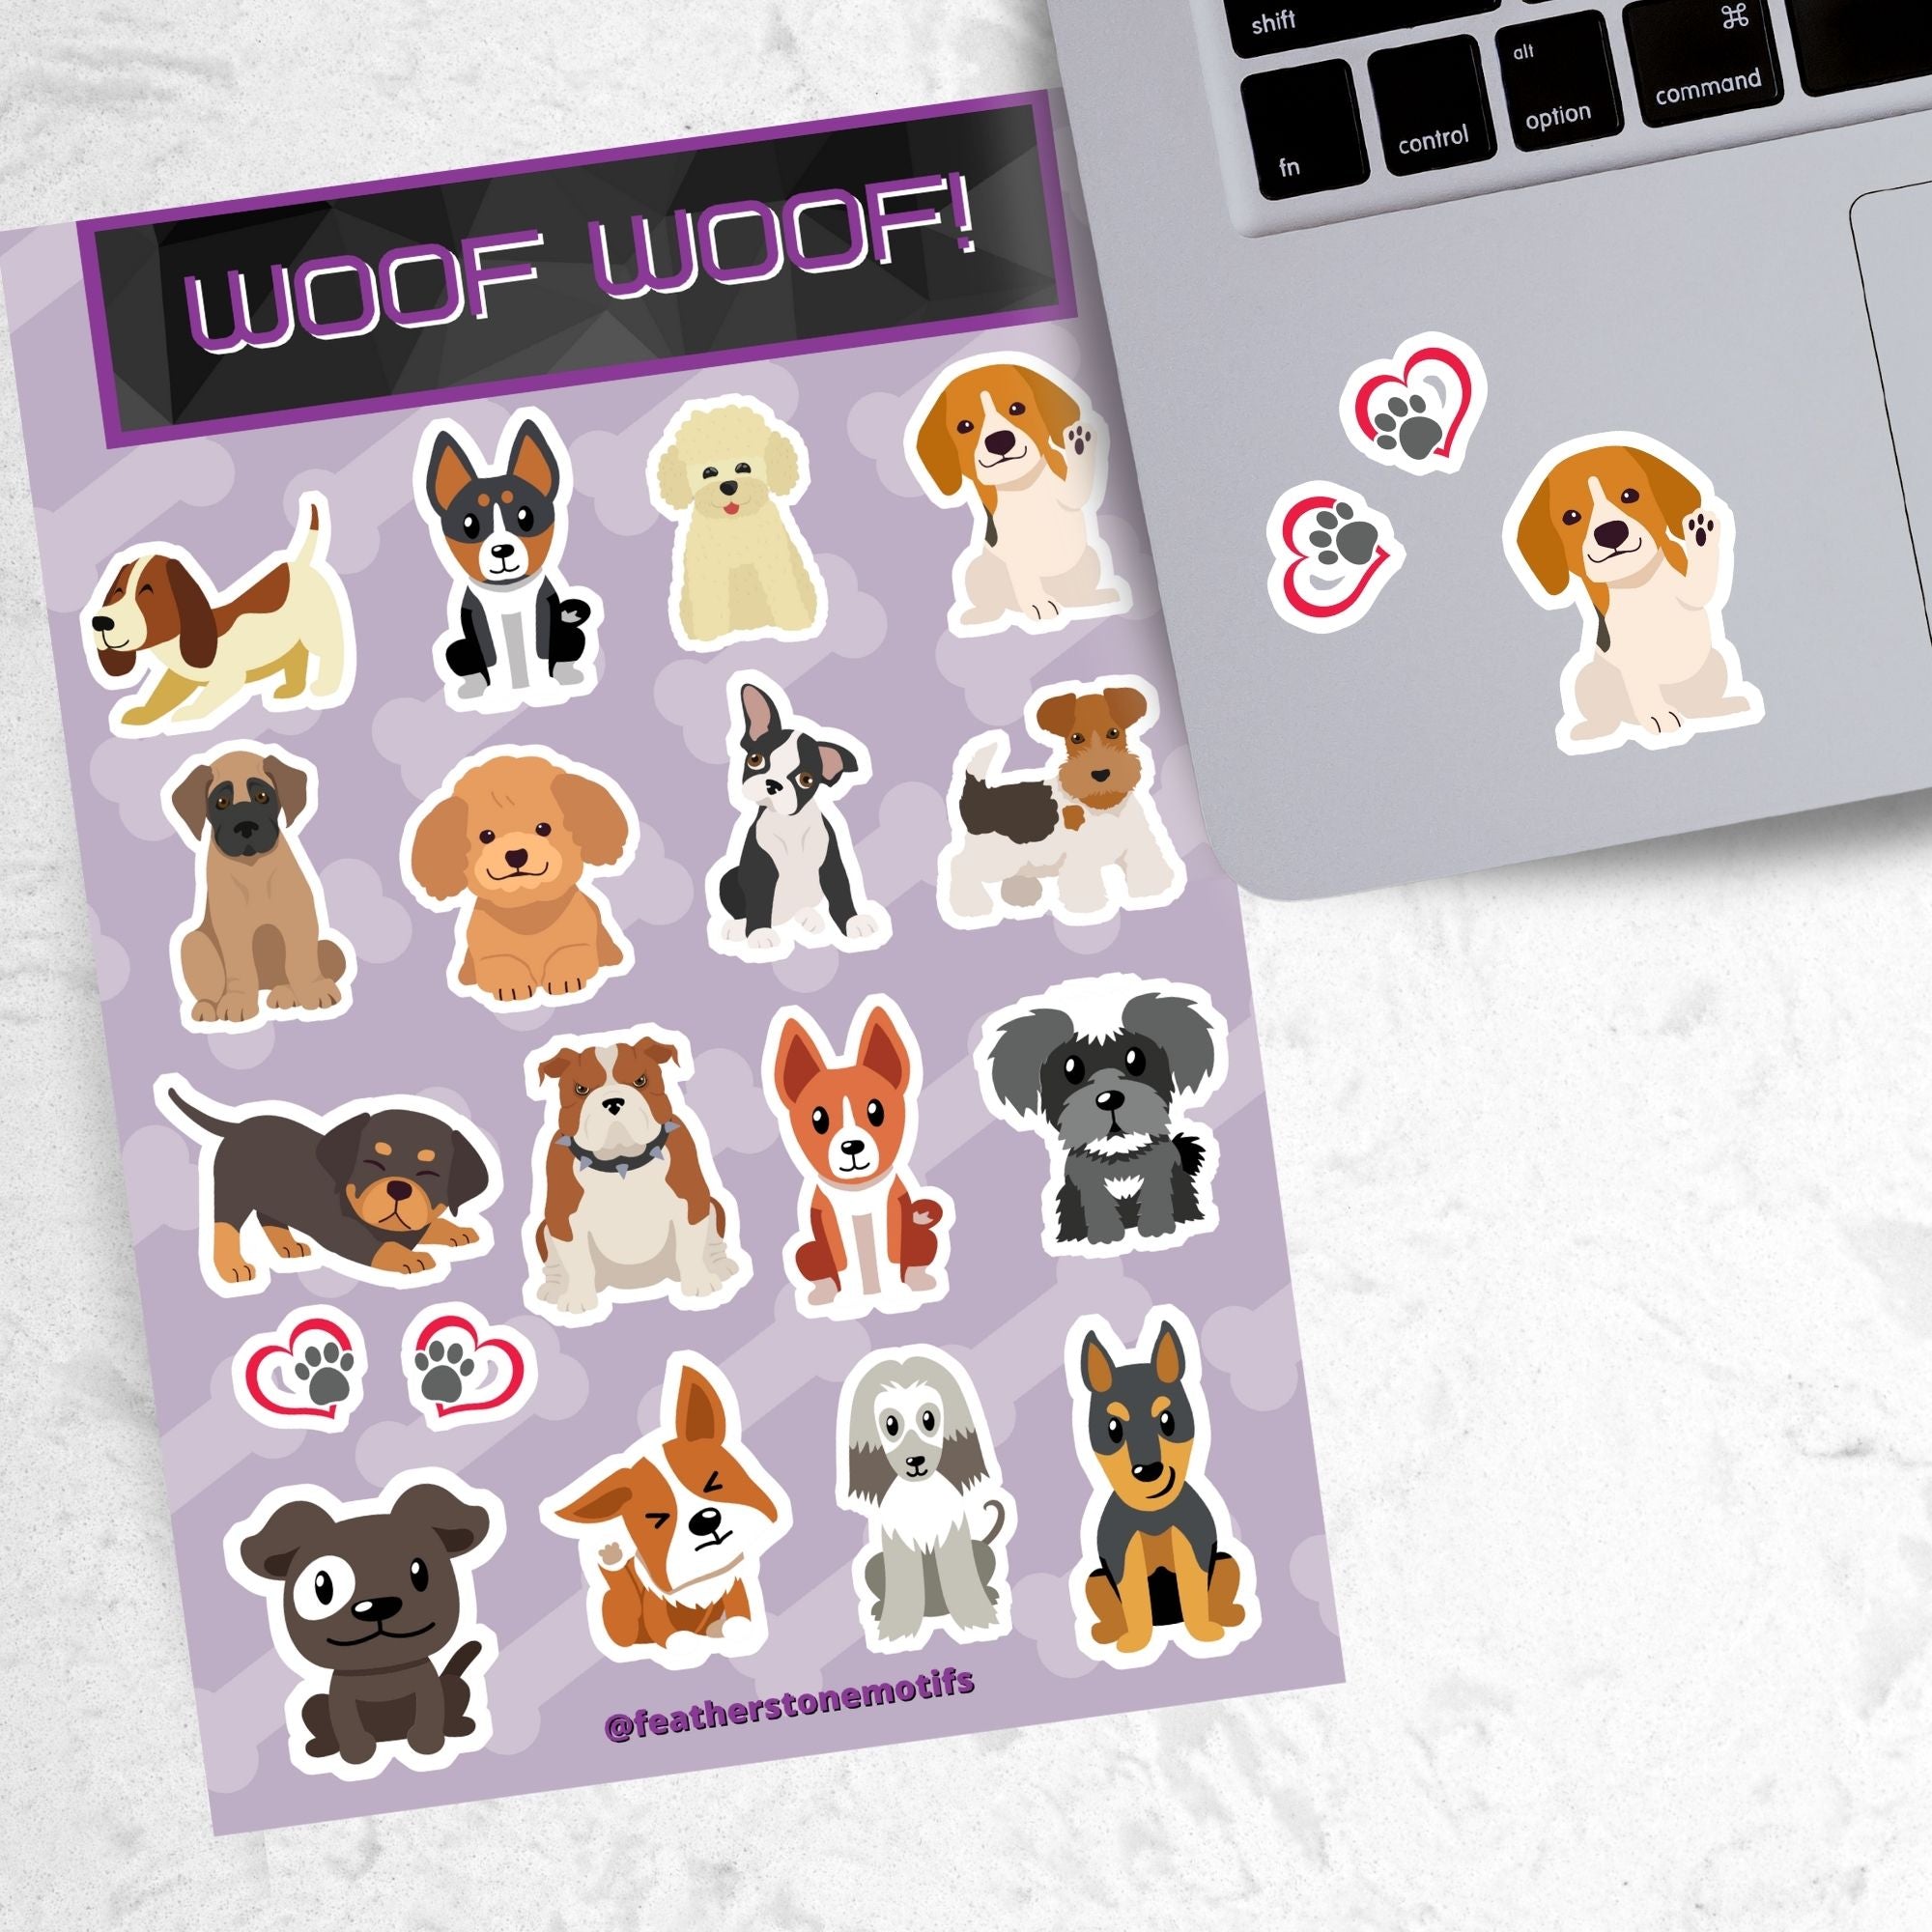 Dog lovers, this sticker sheet is for you! It has sticker images of 16 different dogs plus 2 heart paw stickers. Is your favorite puppy here? This image shows the sticker sheet next to an open laptop with 2 paw heart stickers and a beagle puppy sticker applied below the keyboard.